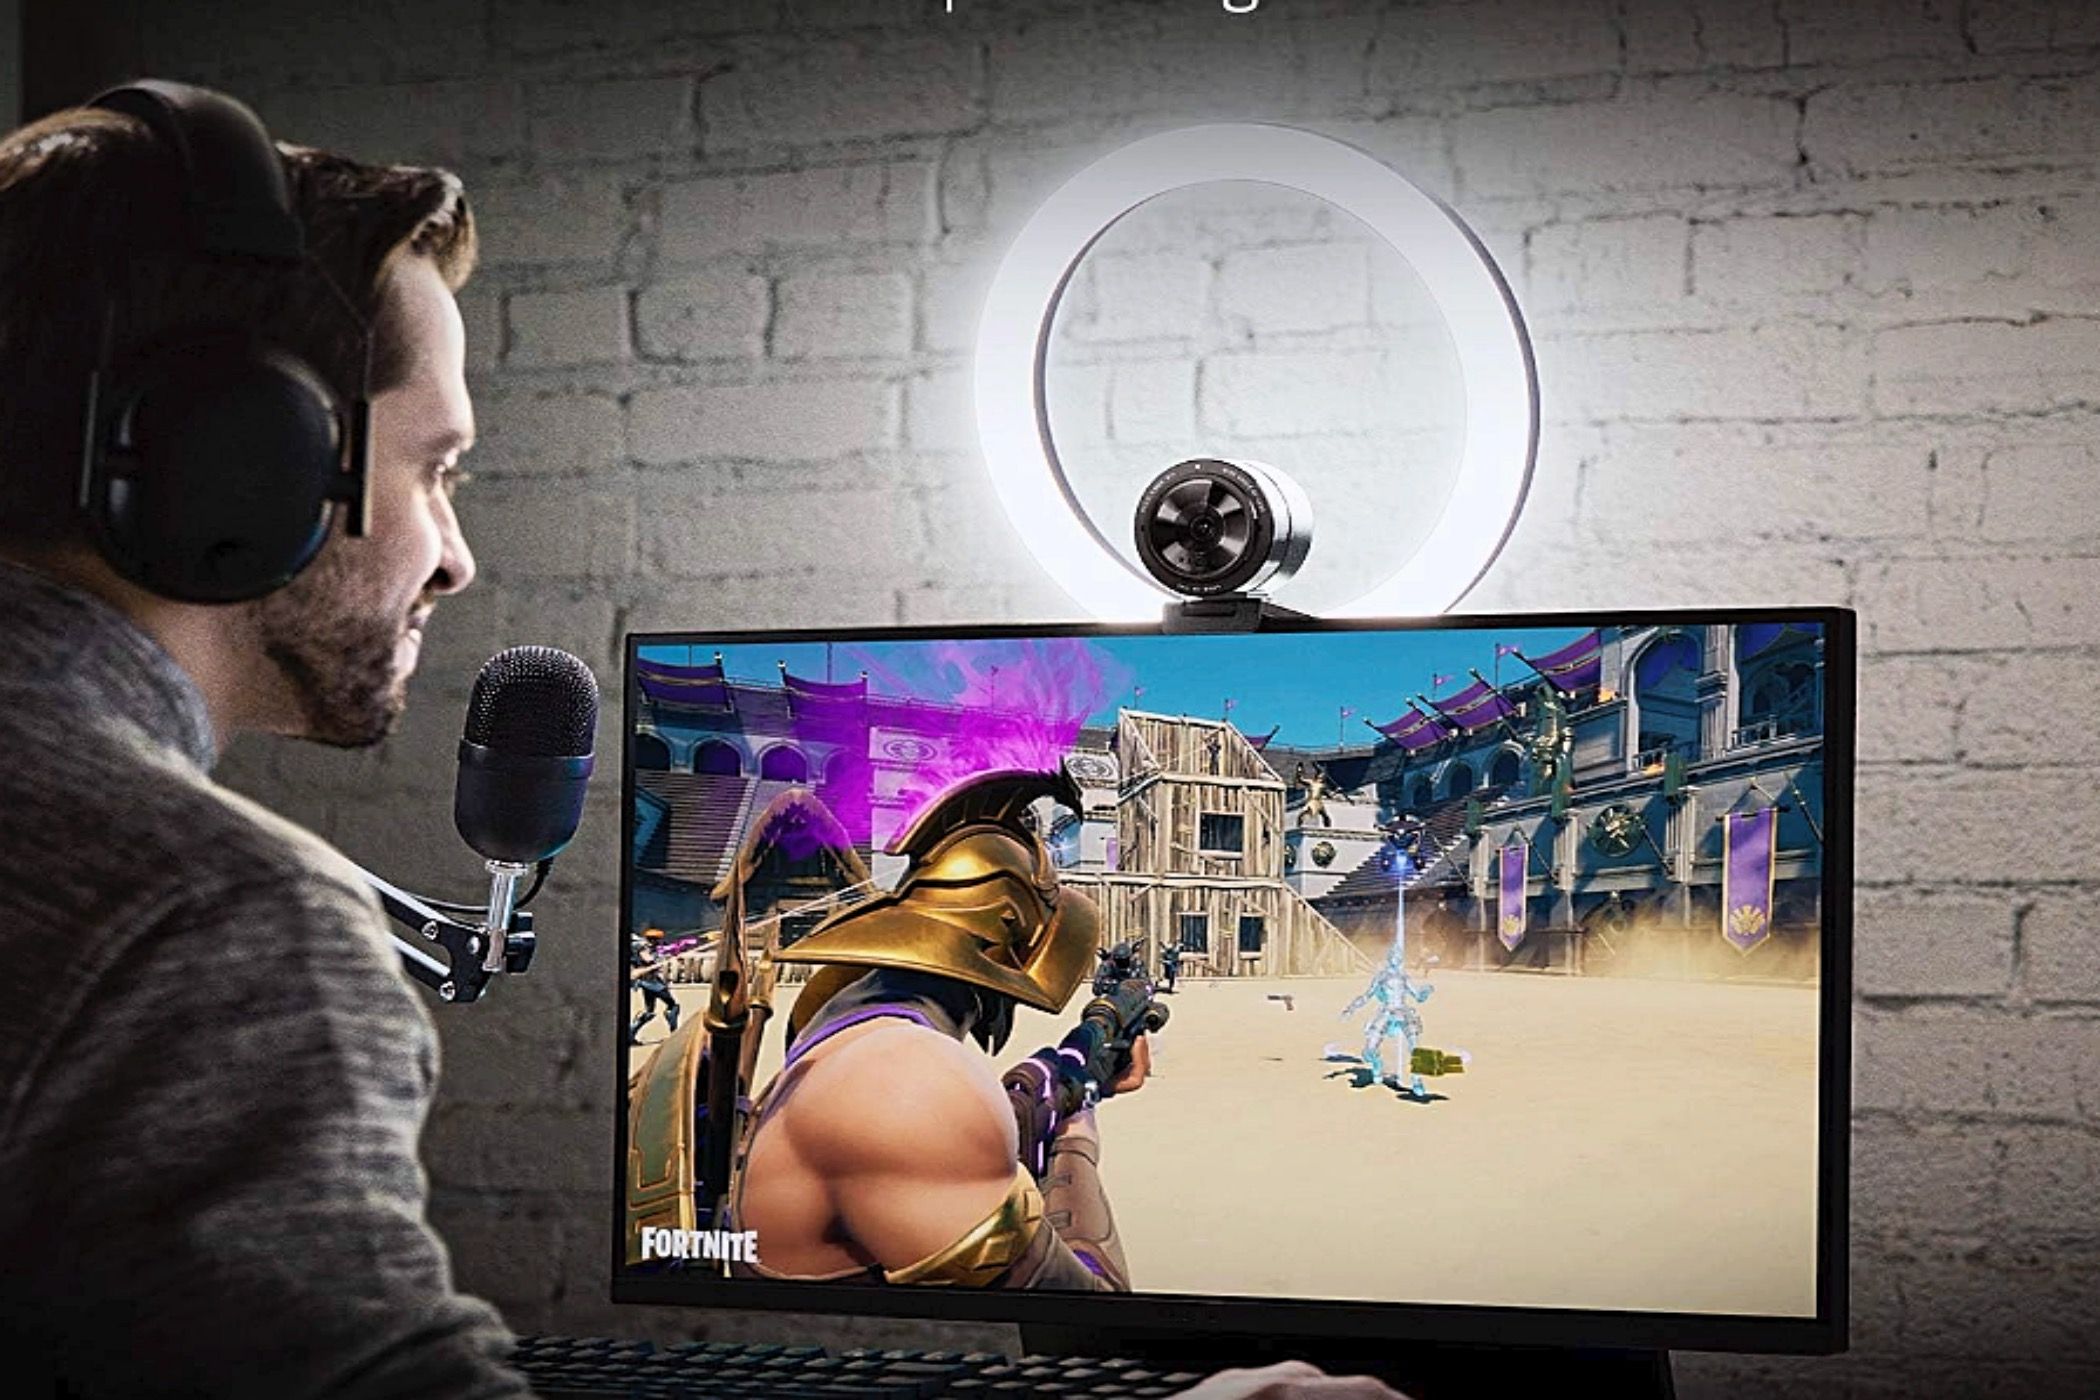 A man illuminating himself with the Razer Ring Light while playing video games